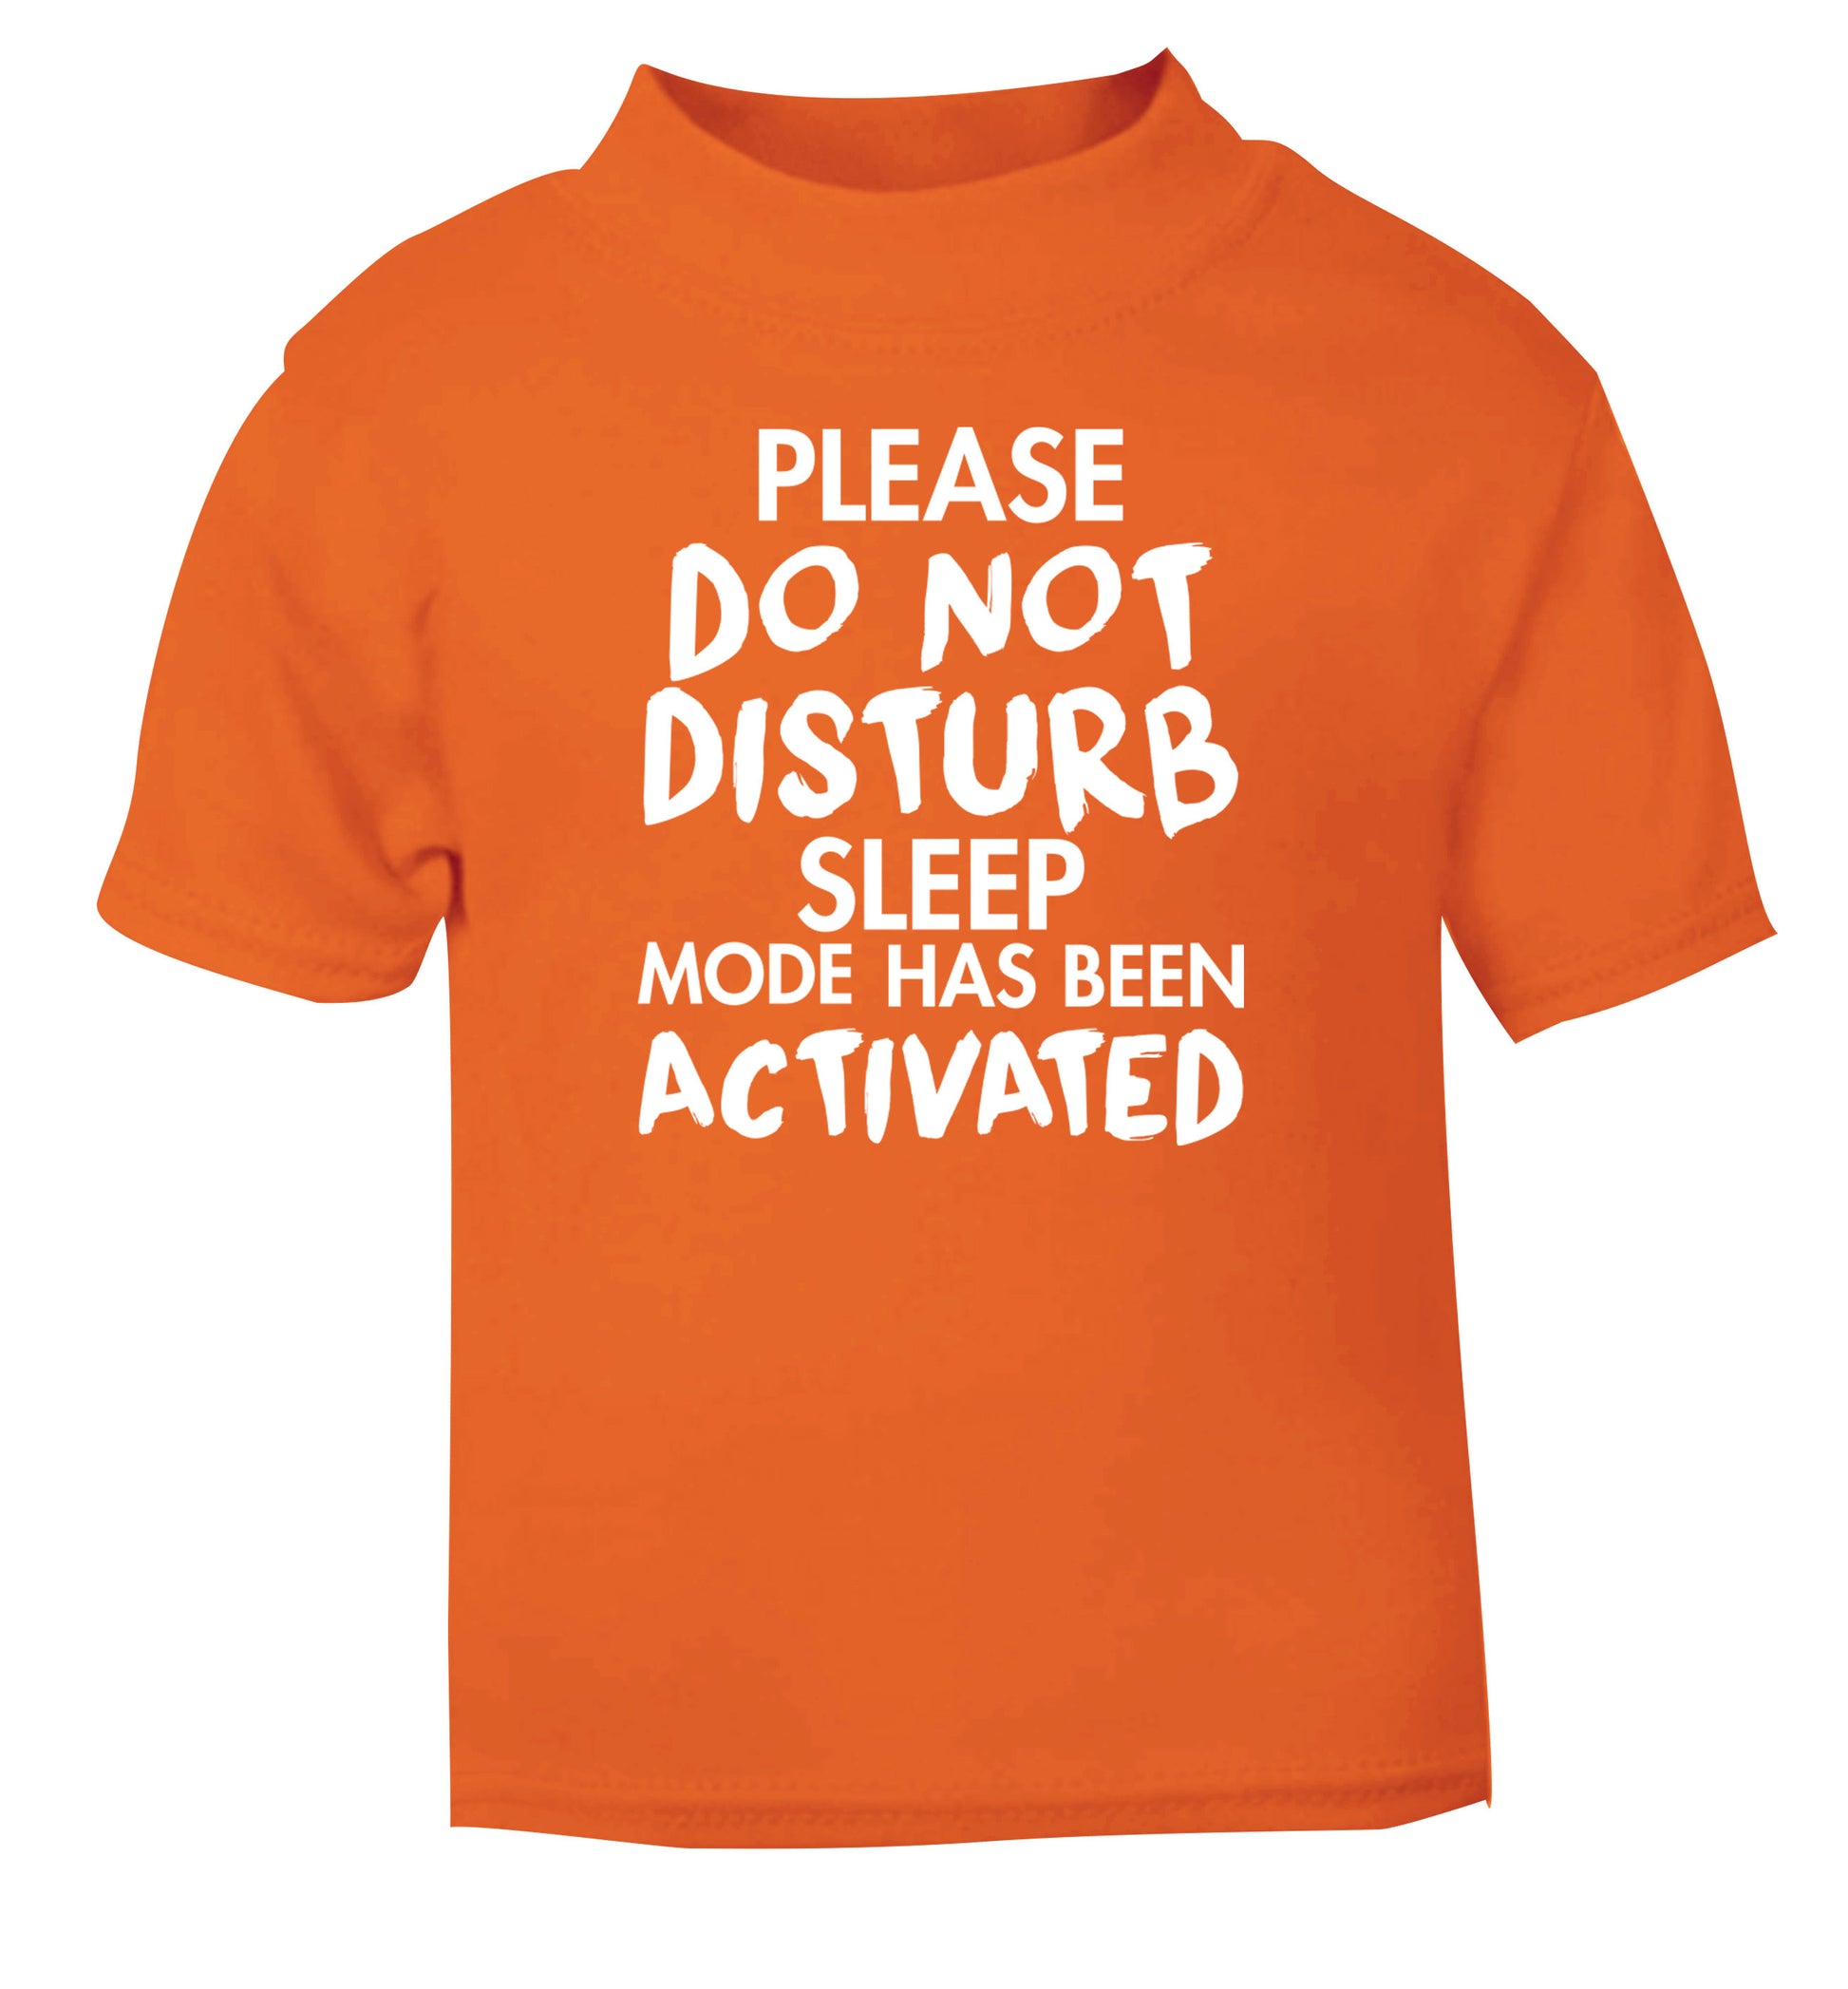 Please do not disturb sleeping mode has been activated orange Baby Toddler Tshirt 2 Years